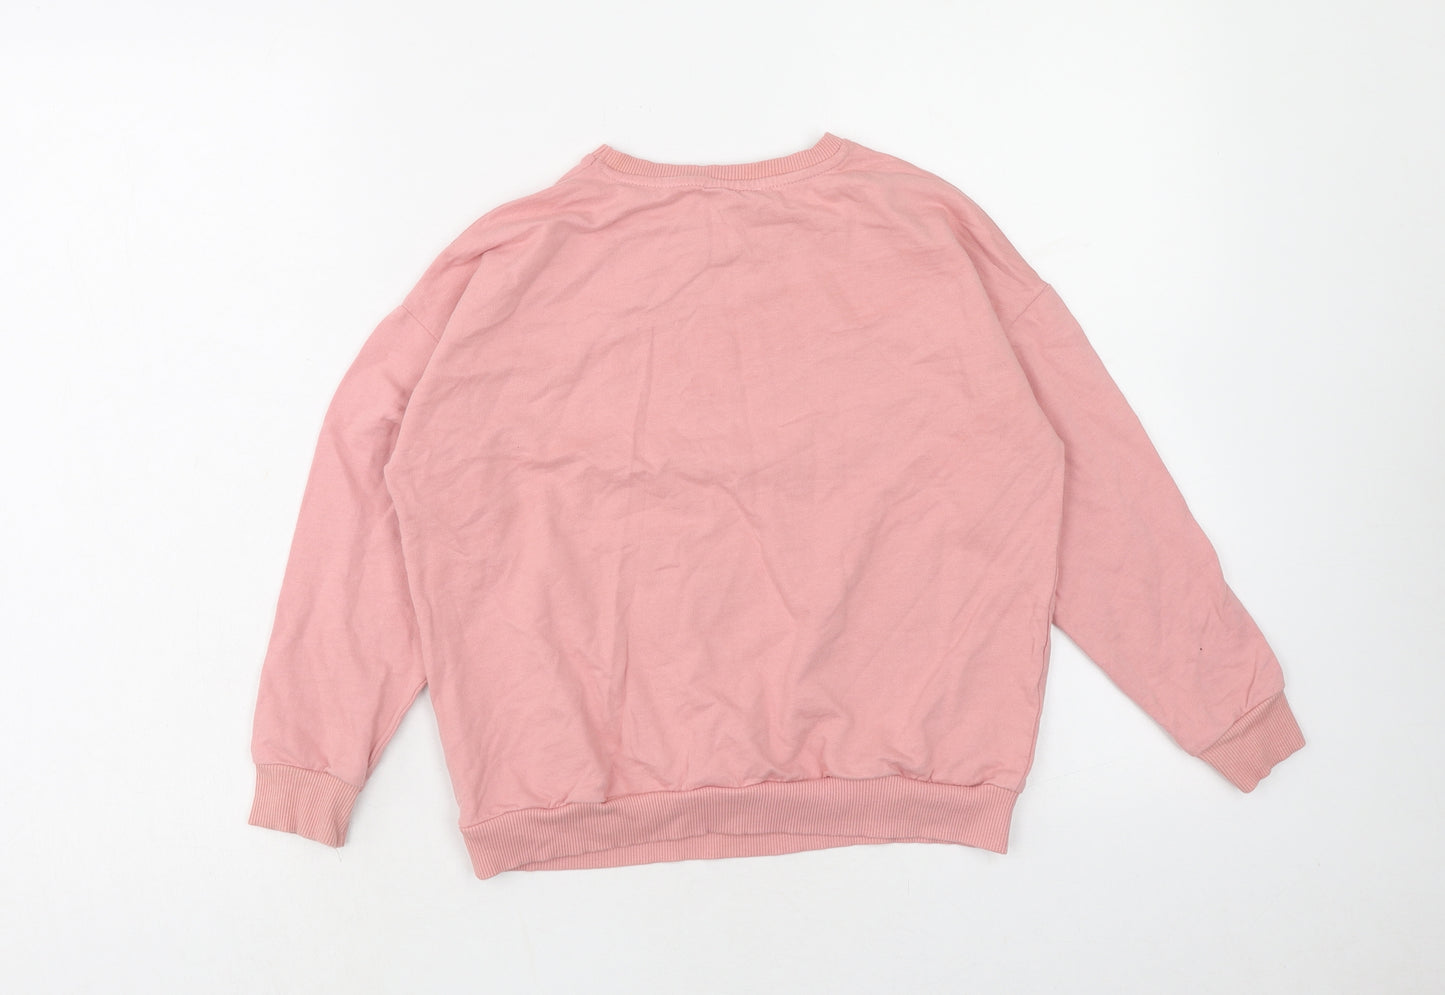 George Girls Pink Cotton Pullover Sweatshirt Size 8-9 Years Pullover - North Pole Lapland